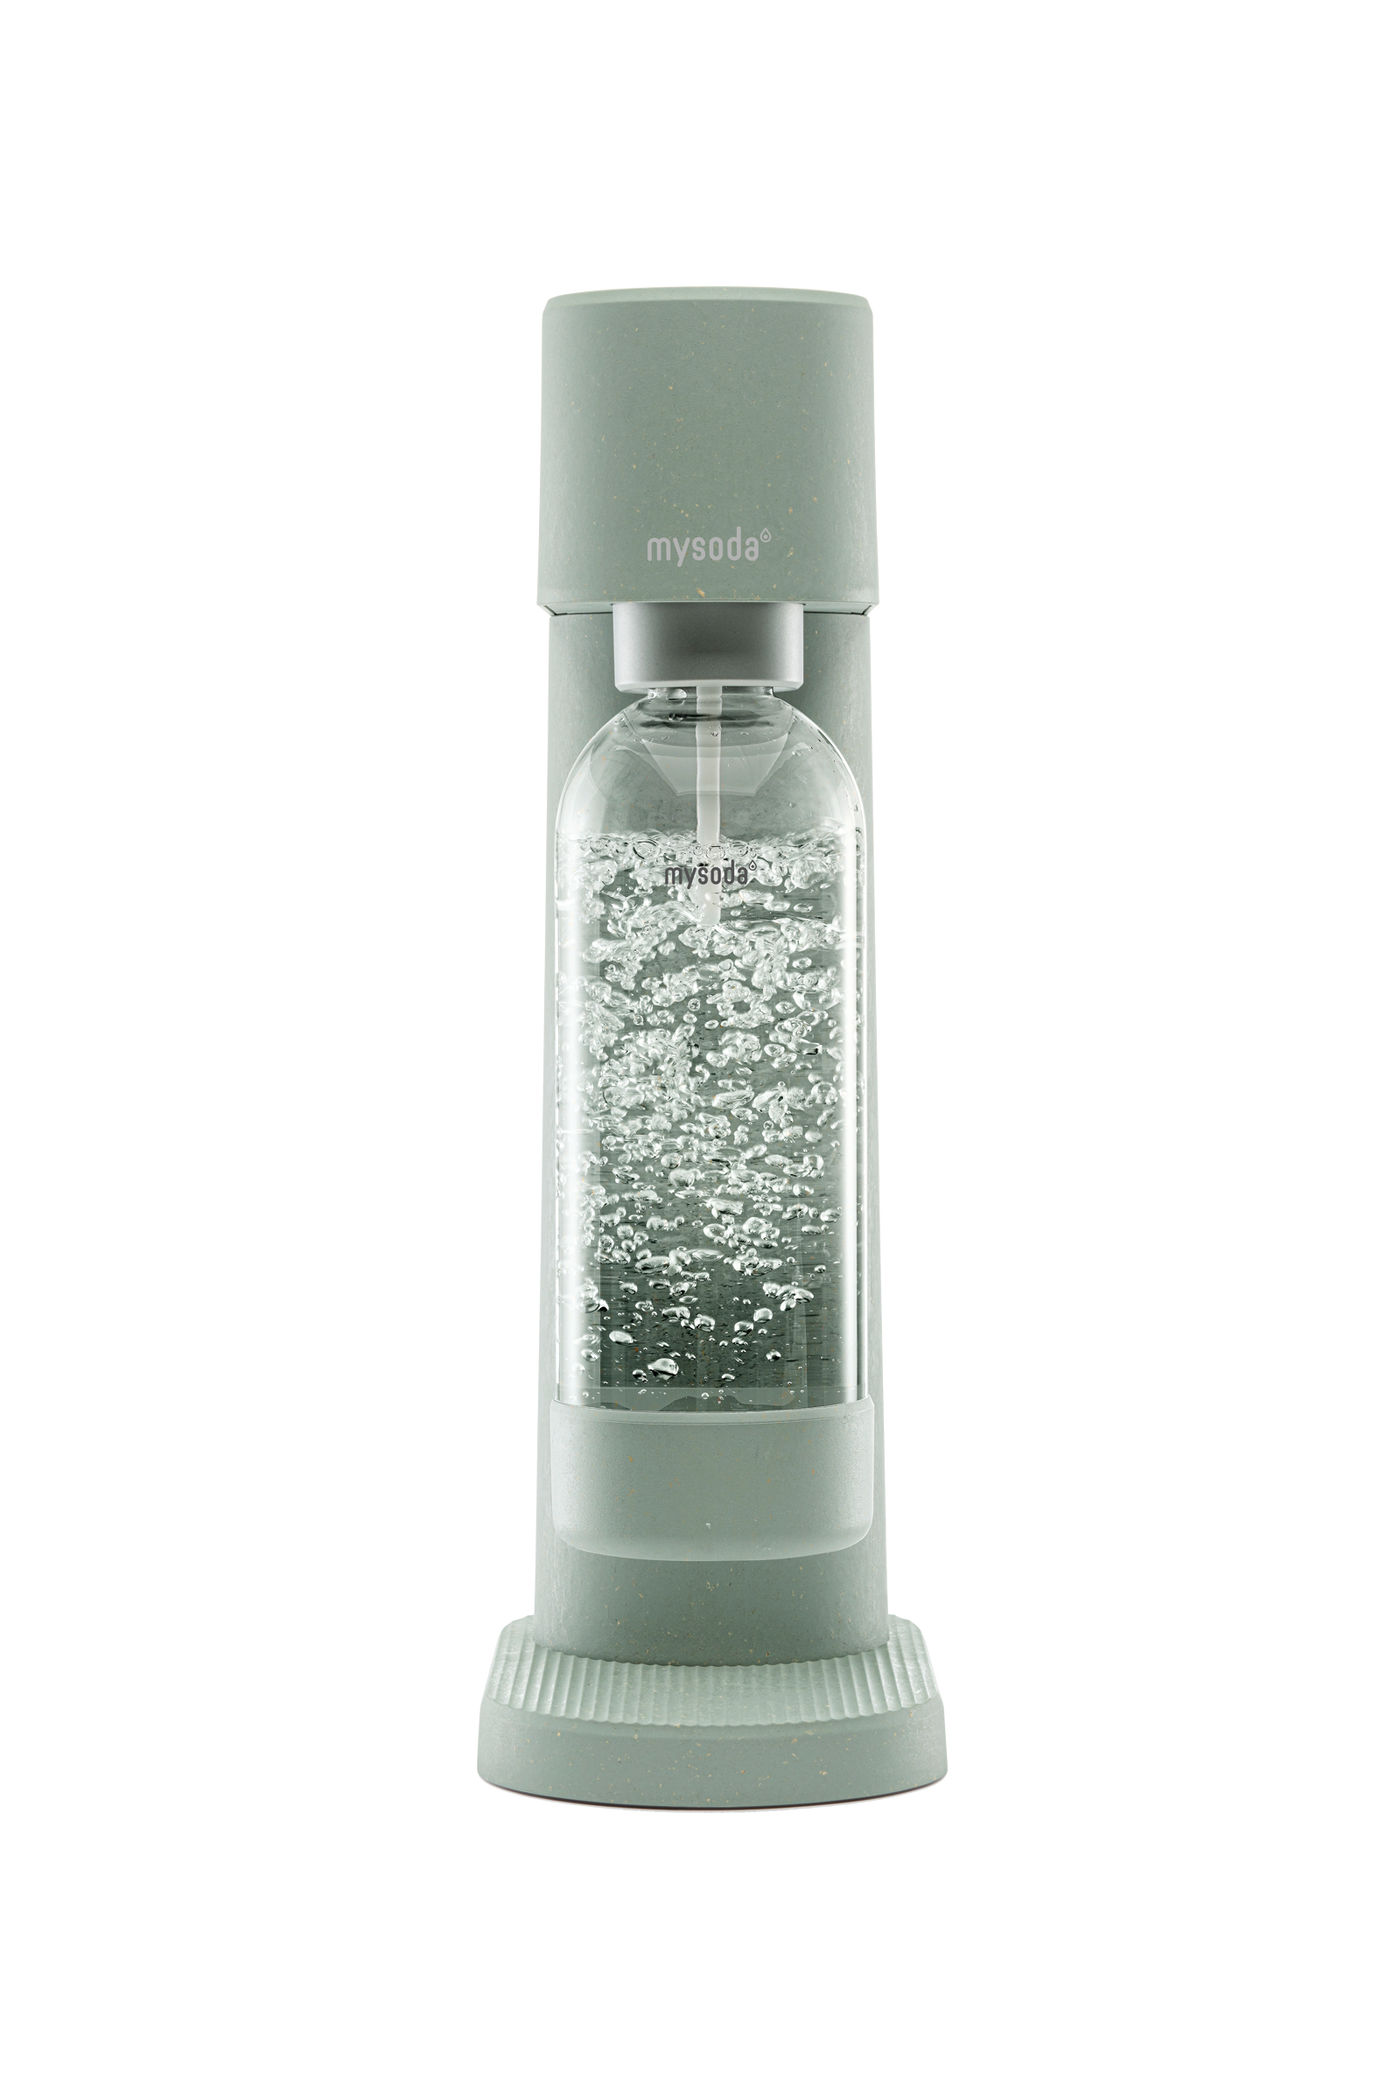 Pigeon Mysoda Woody sparkling water maker viewed from the front